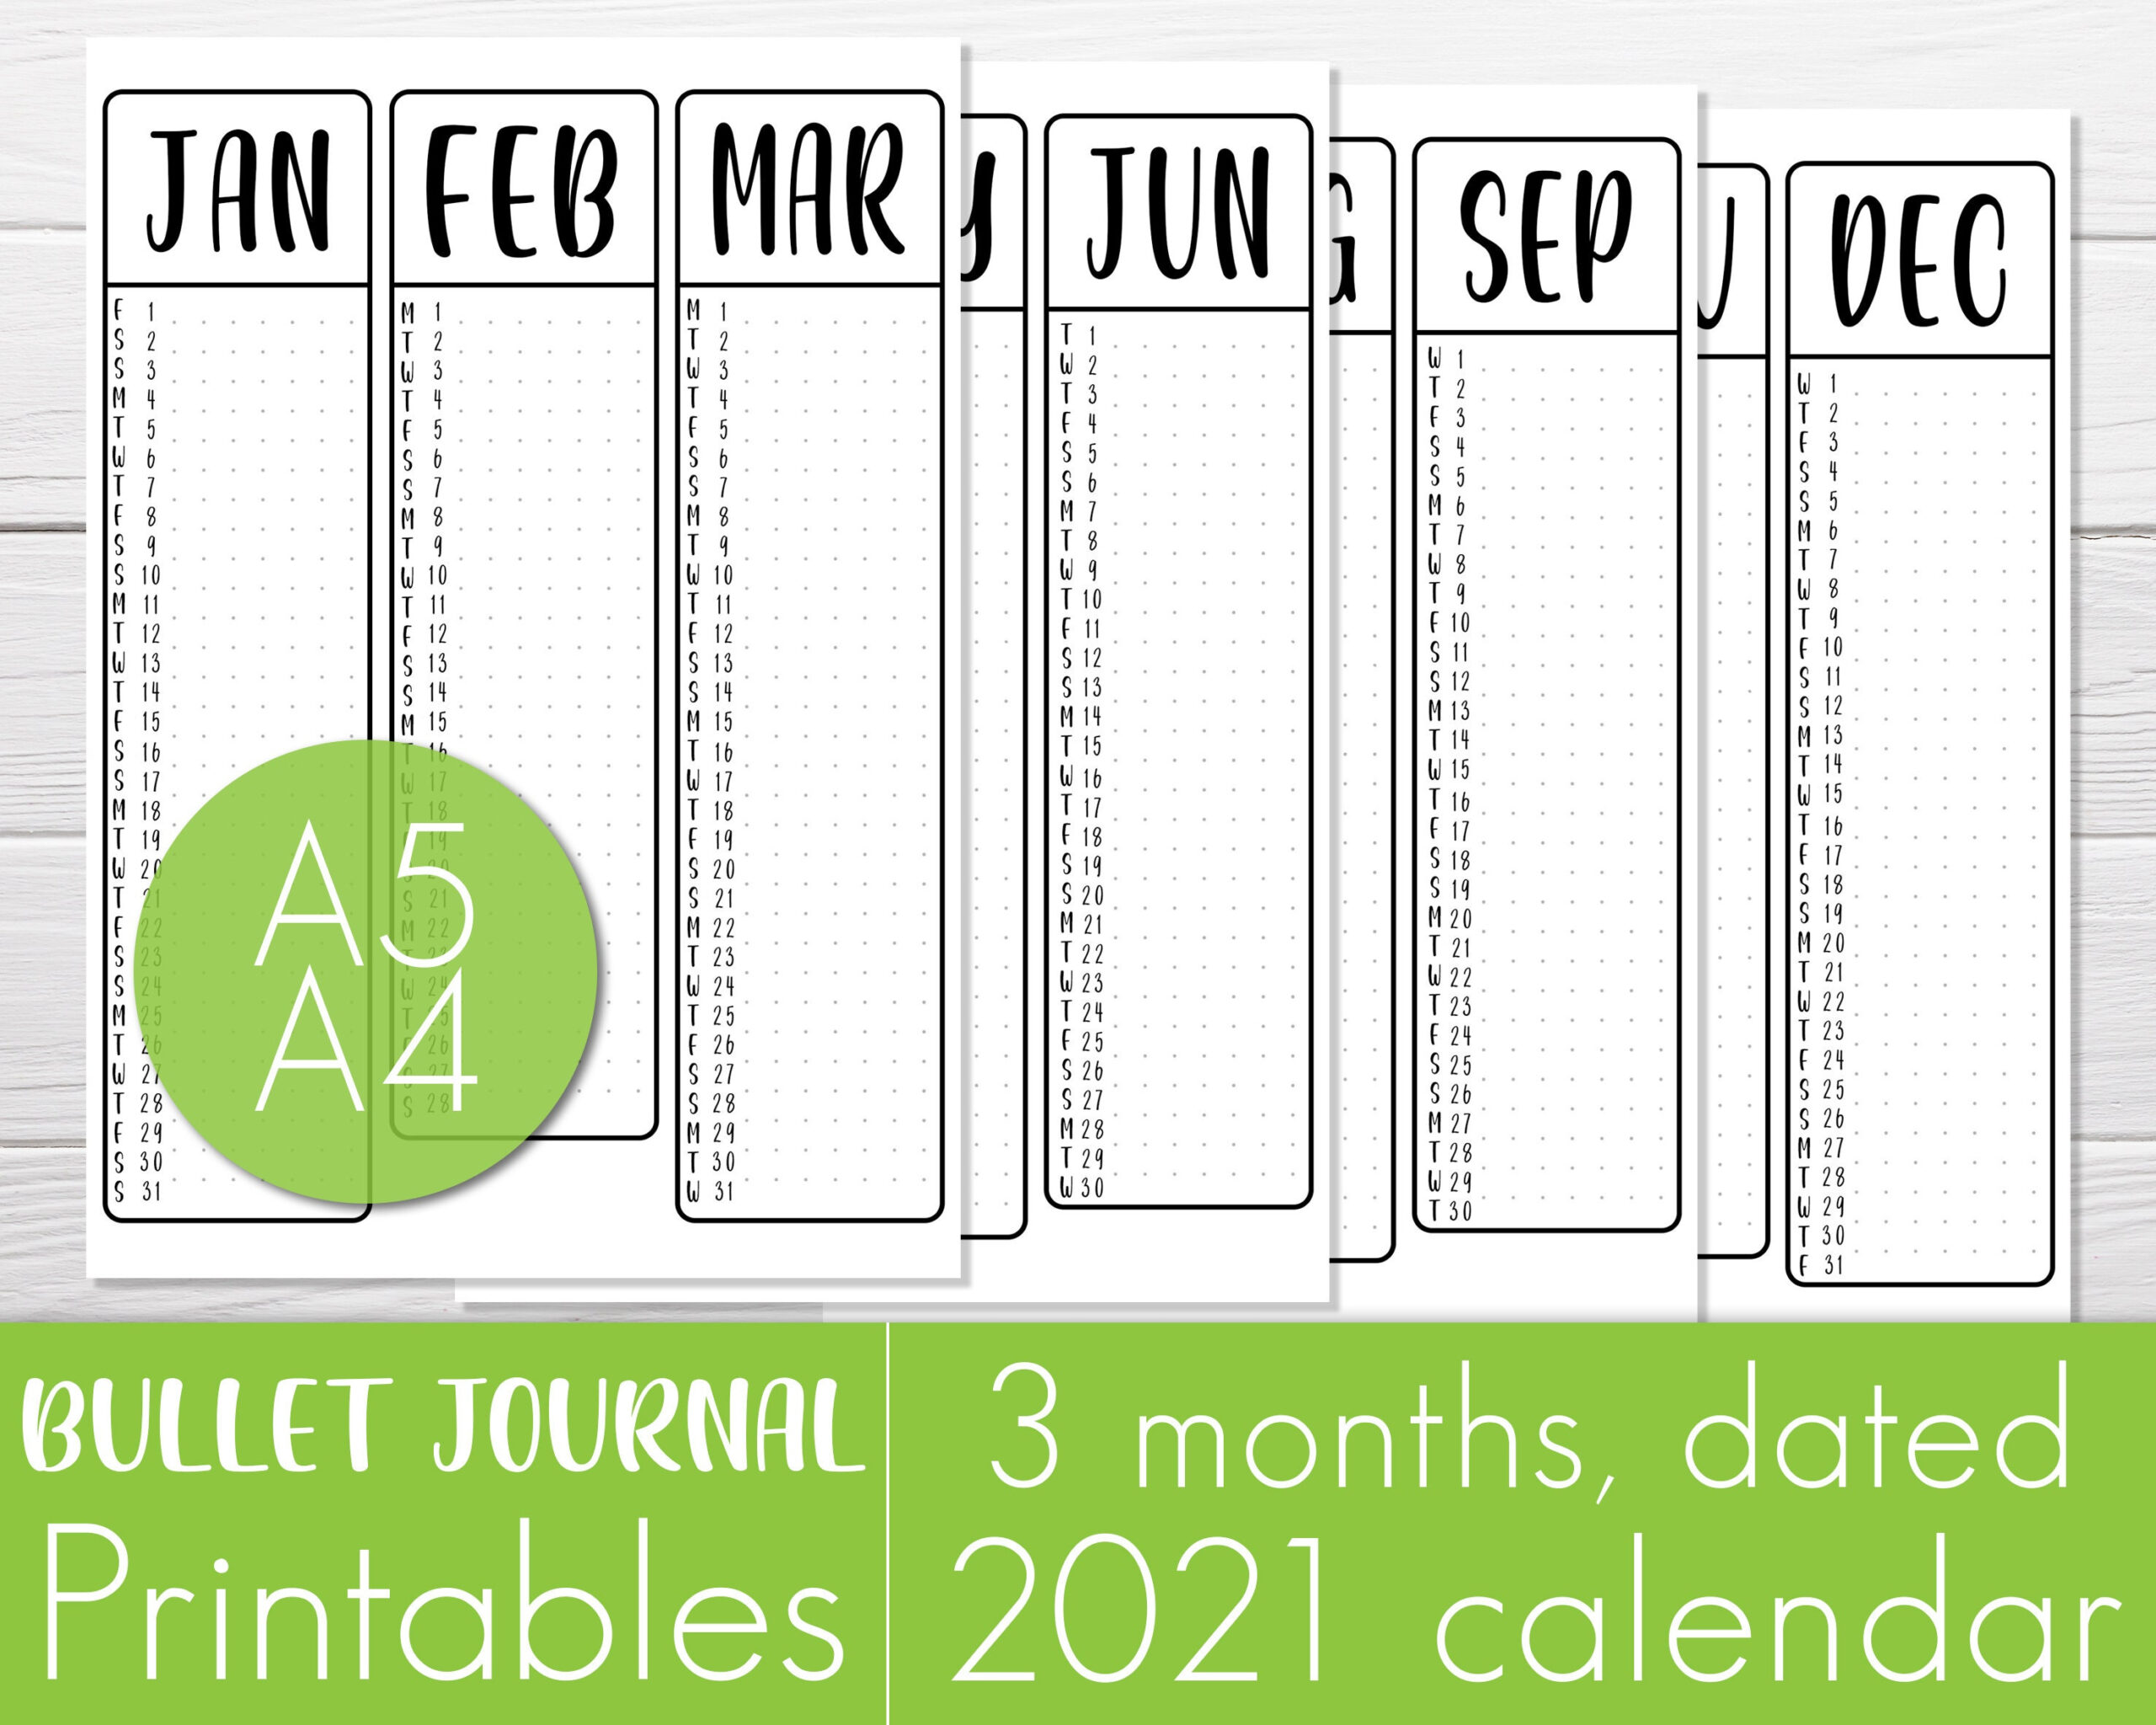 2021 Calendar 3 Months On One Page Planner Printable | Etsy within 3 Month Printable Calendar 2021